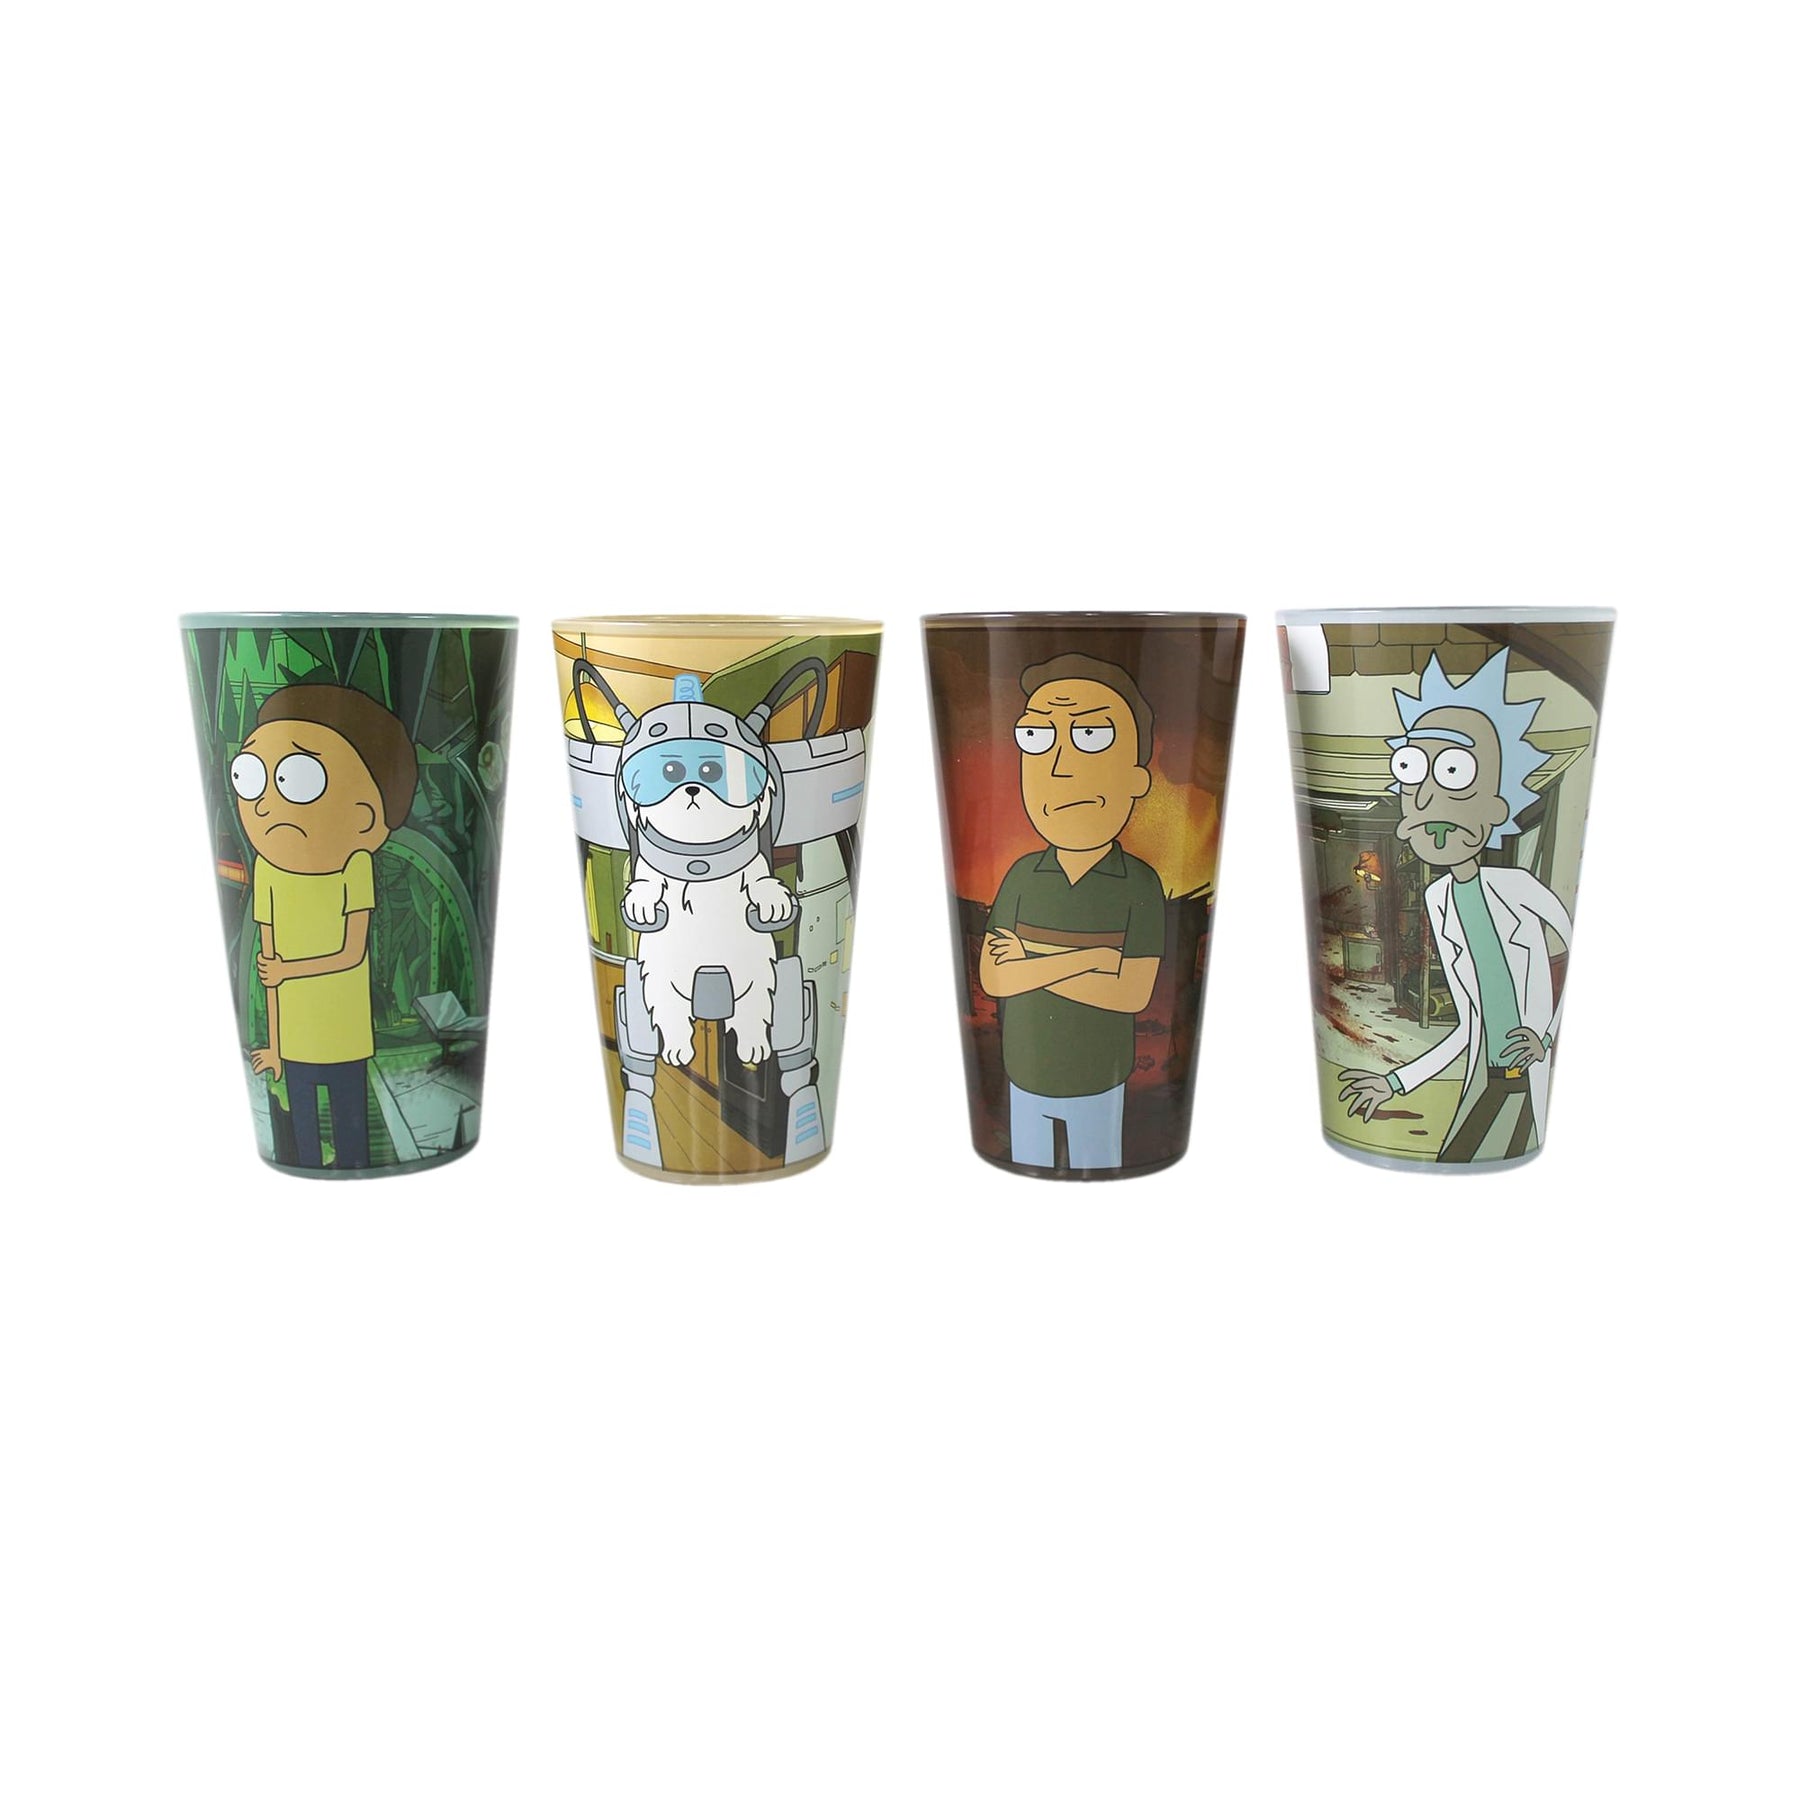 Rick and Morty 16 Ounce Pint Glass Set of 4 | Rick | Morty | Jerry | Snuffles